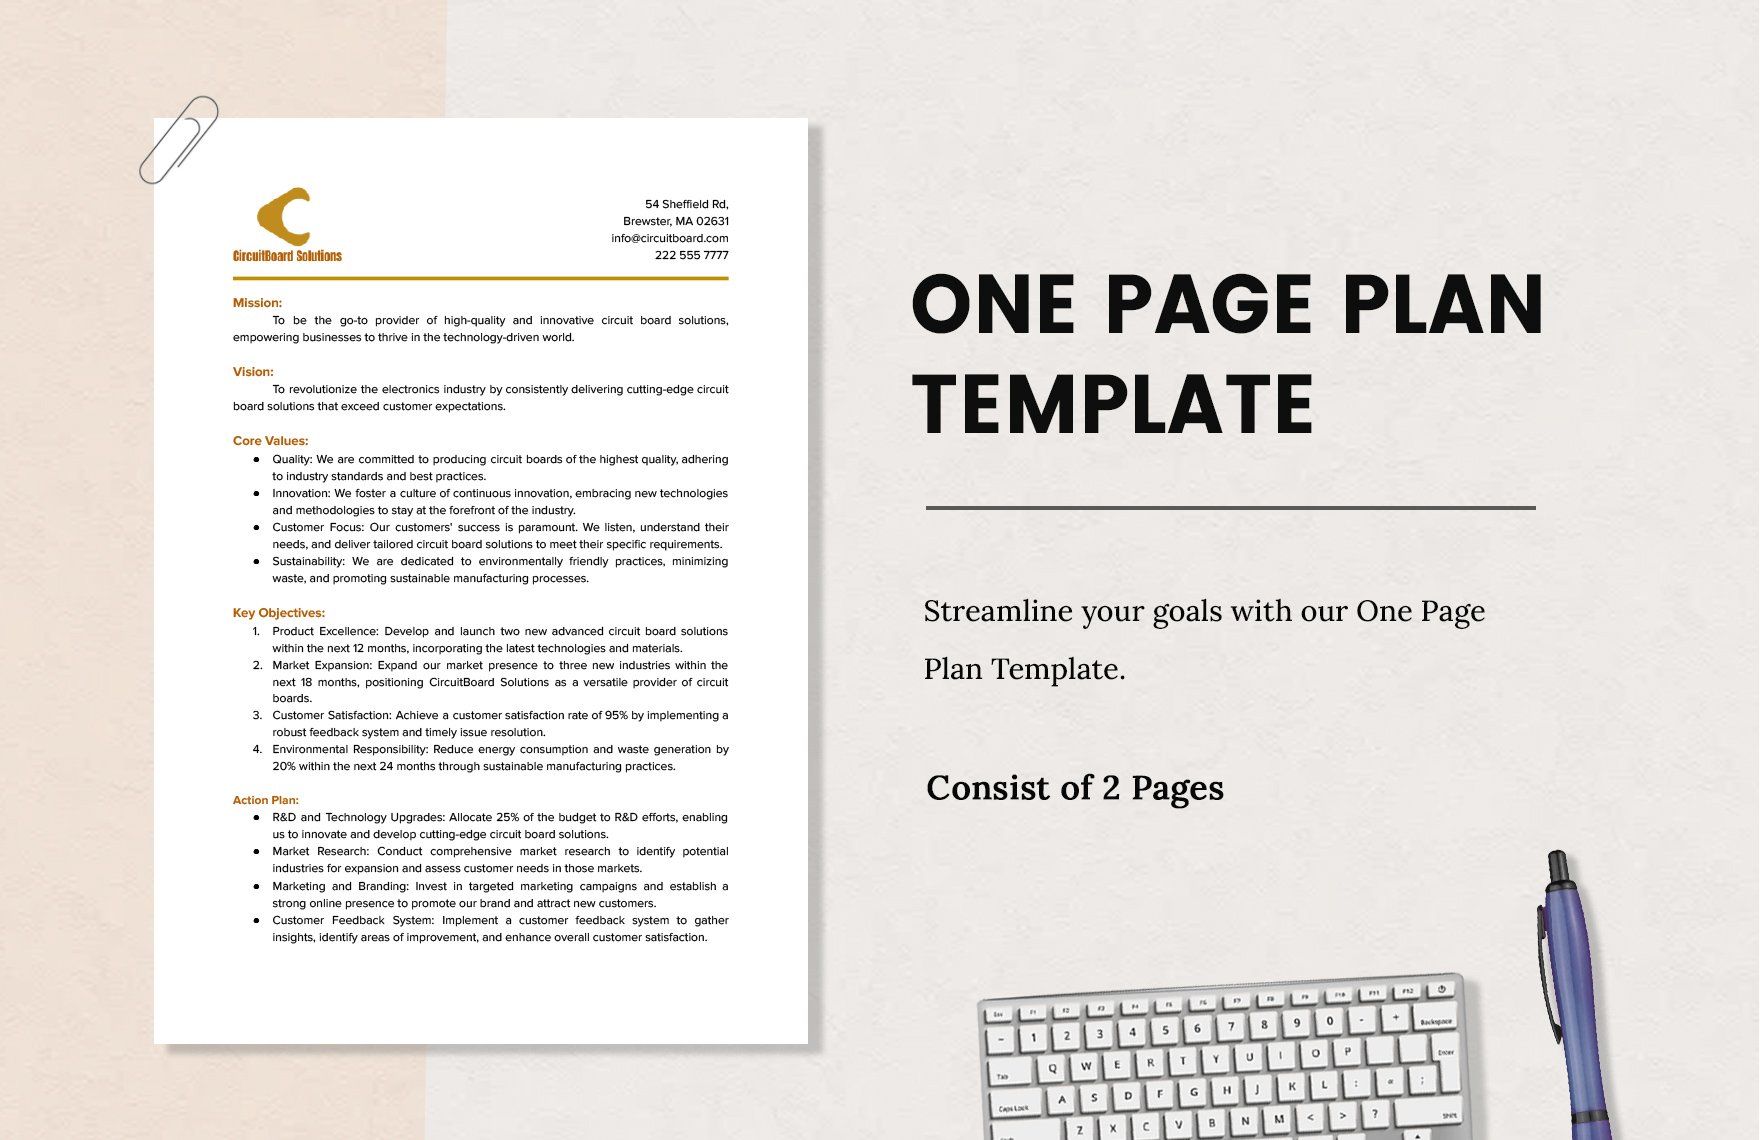 One Page Plan Template